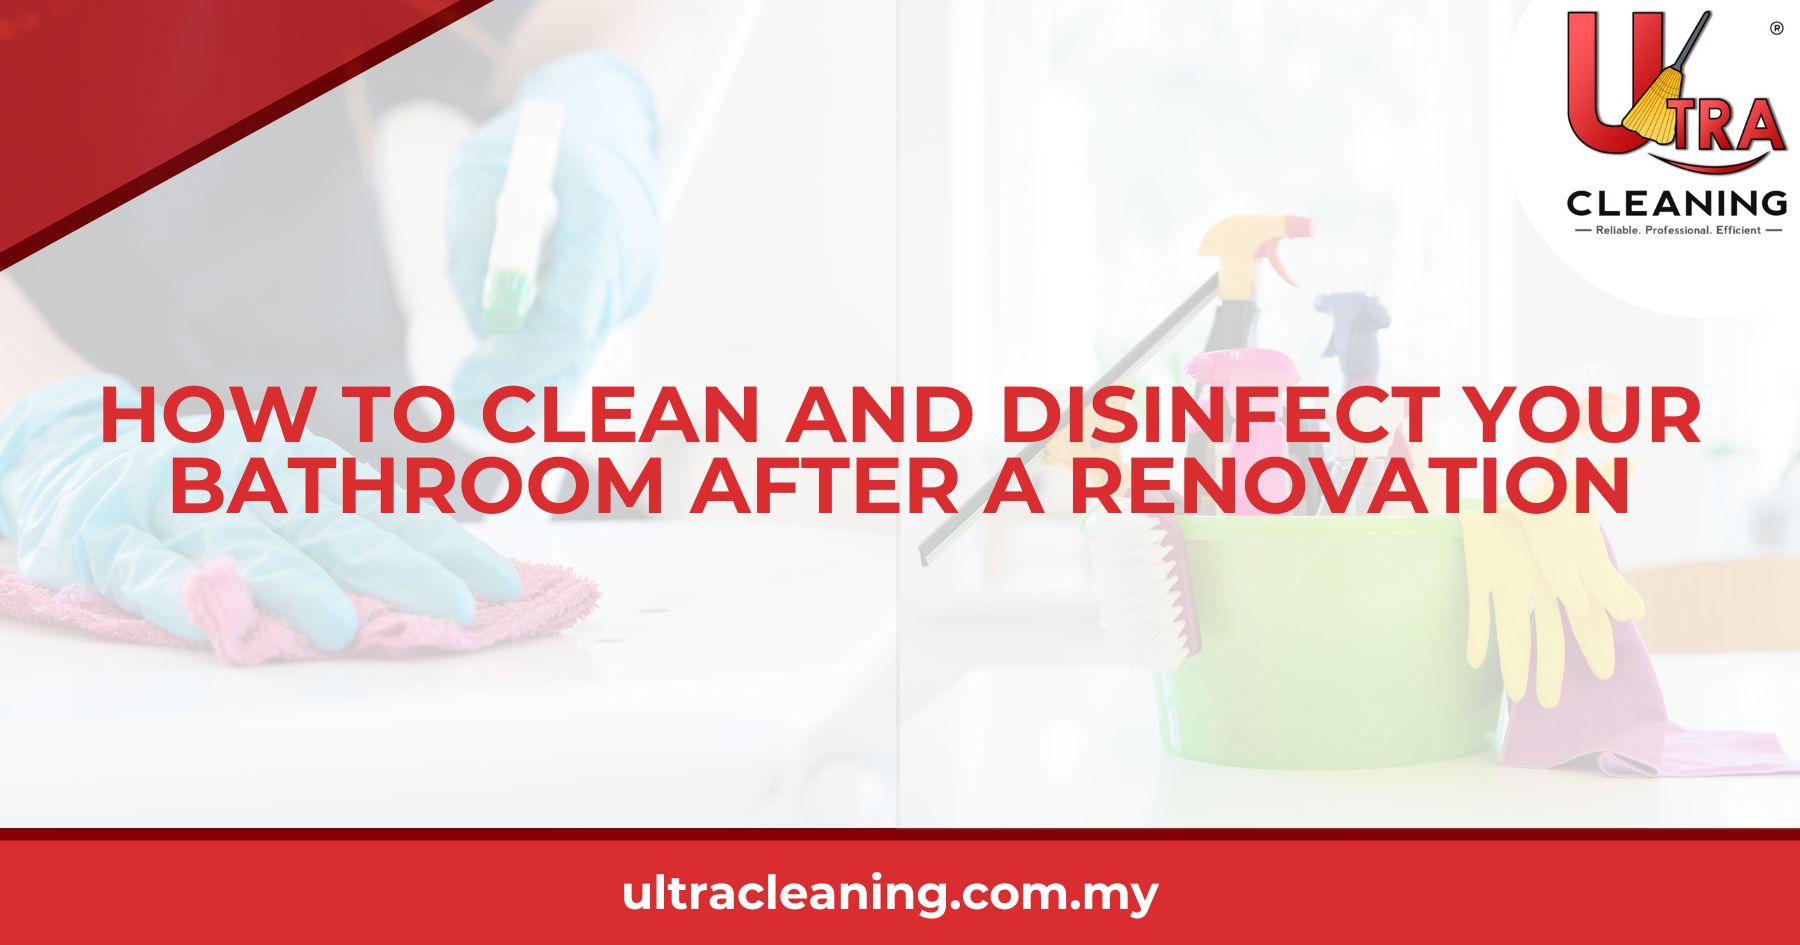 How to Clean and Disinfect Your Bathroom after a Renovation